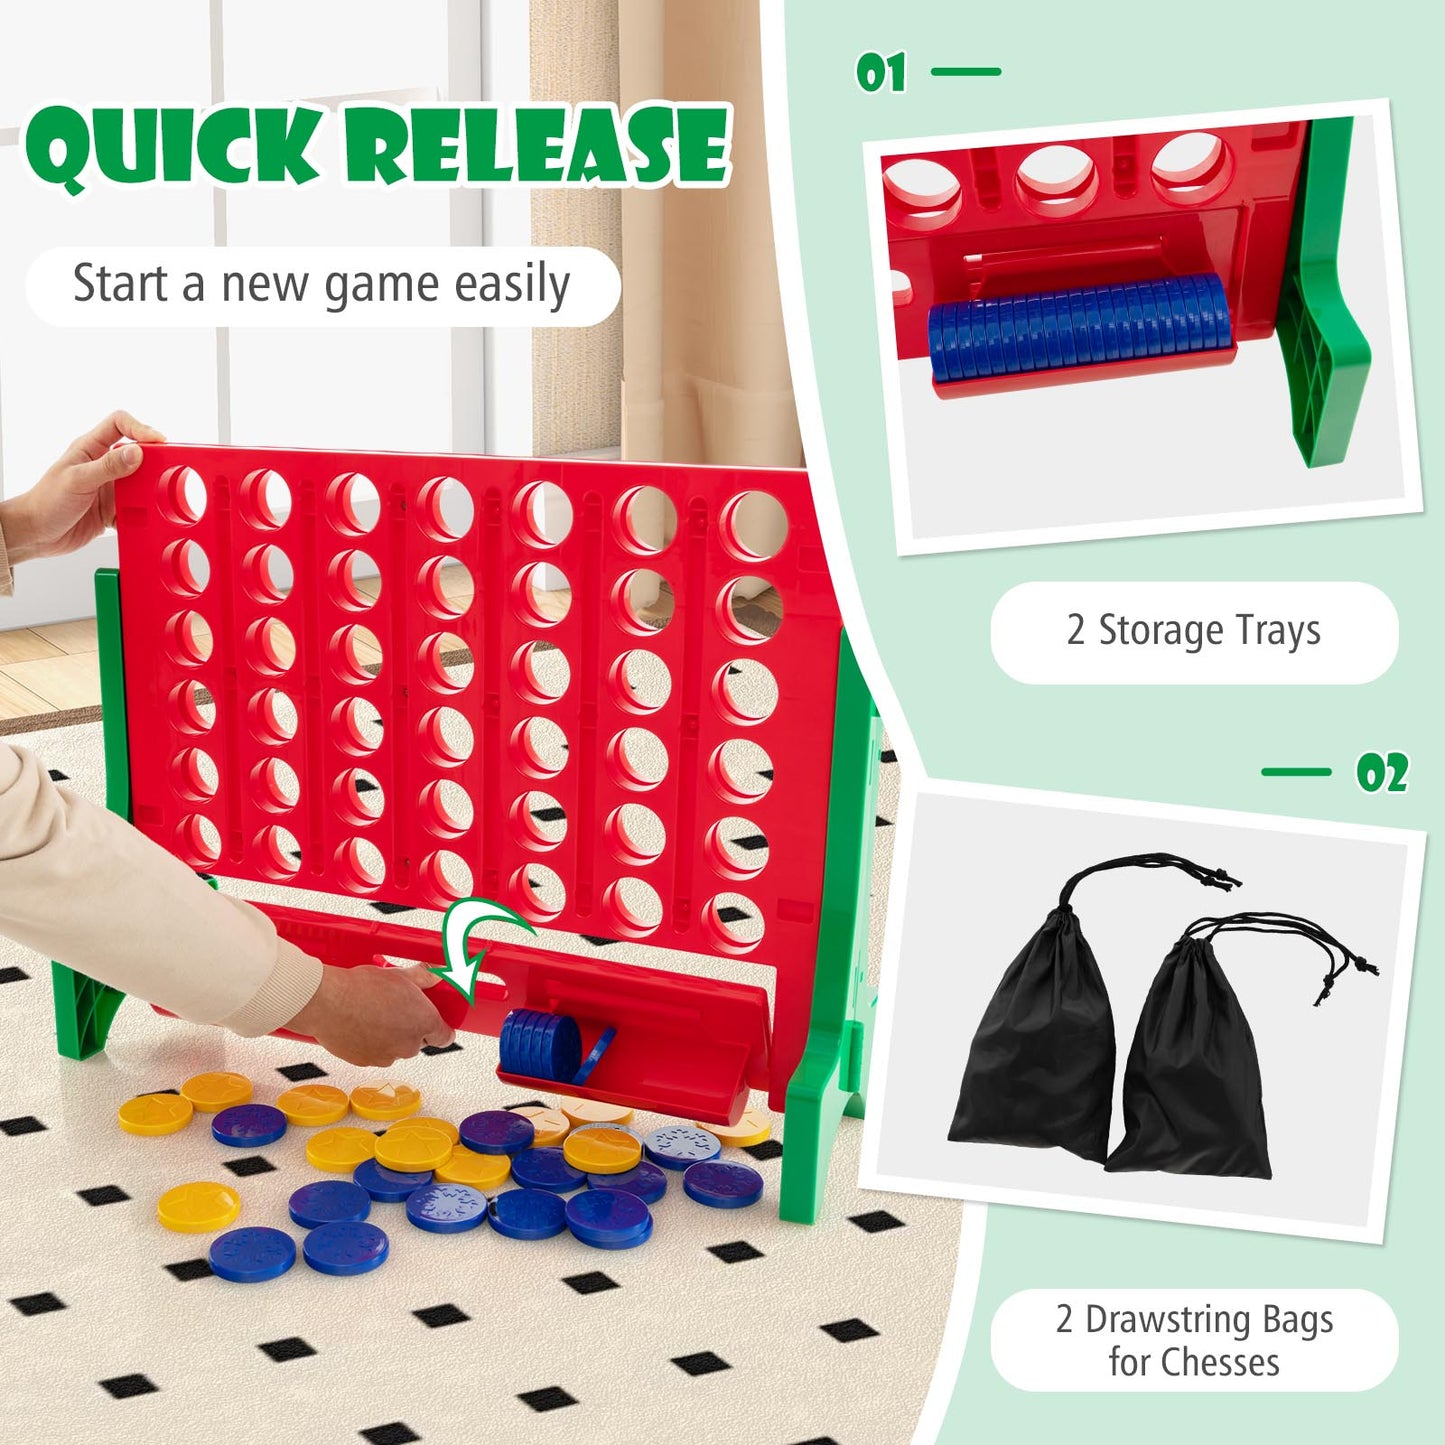 Jumbo 4-to-Score Connect Game Set with Carrying Bag and 42 Coins-Green